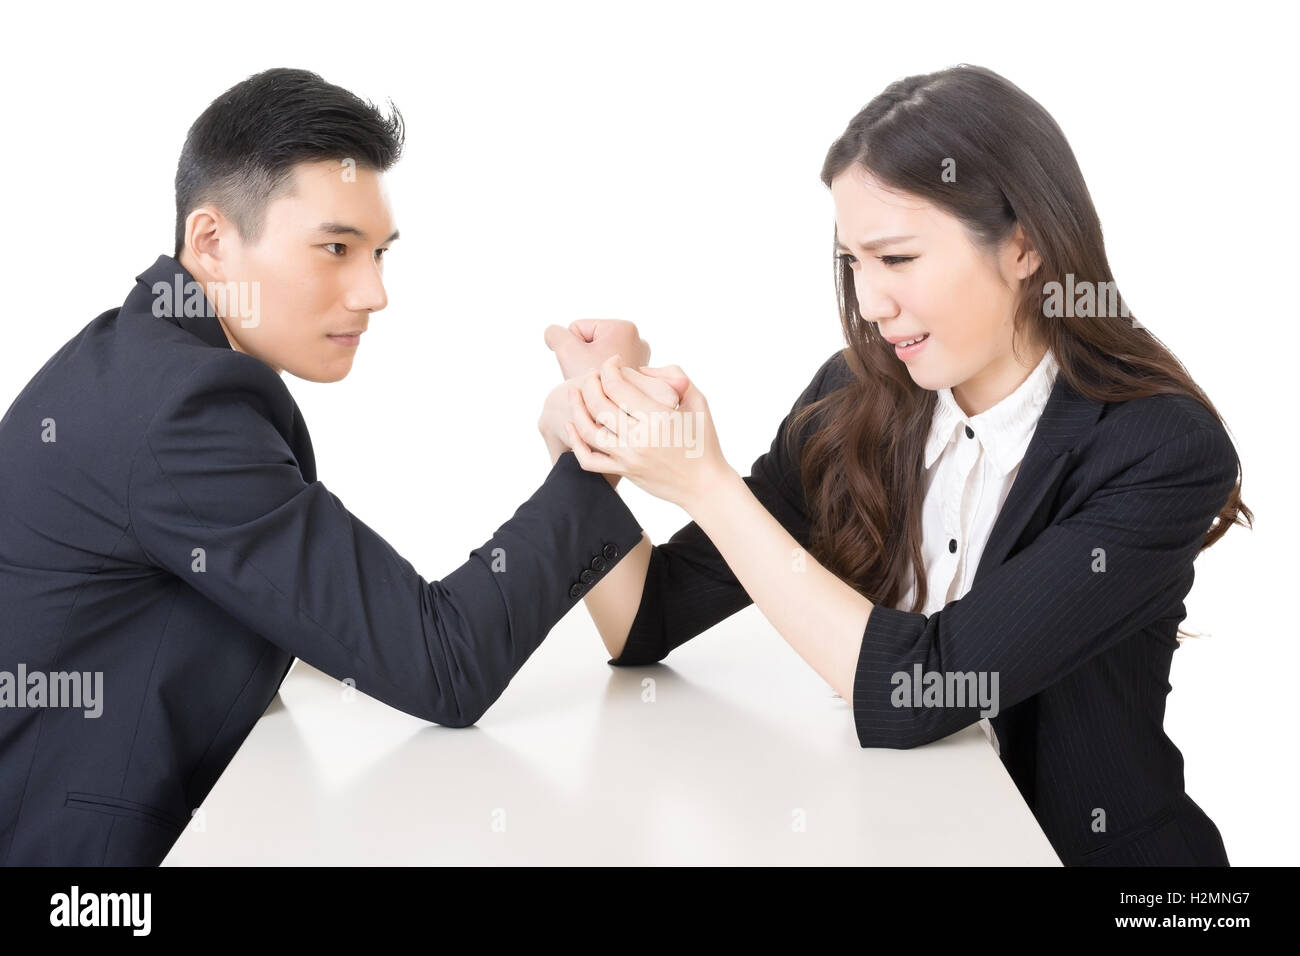 business arm wrestling Stock Photo